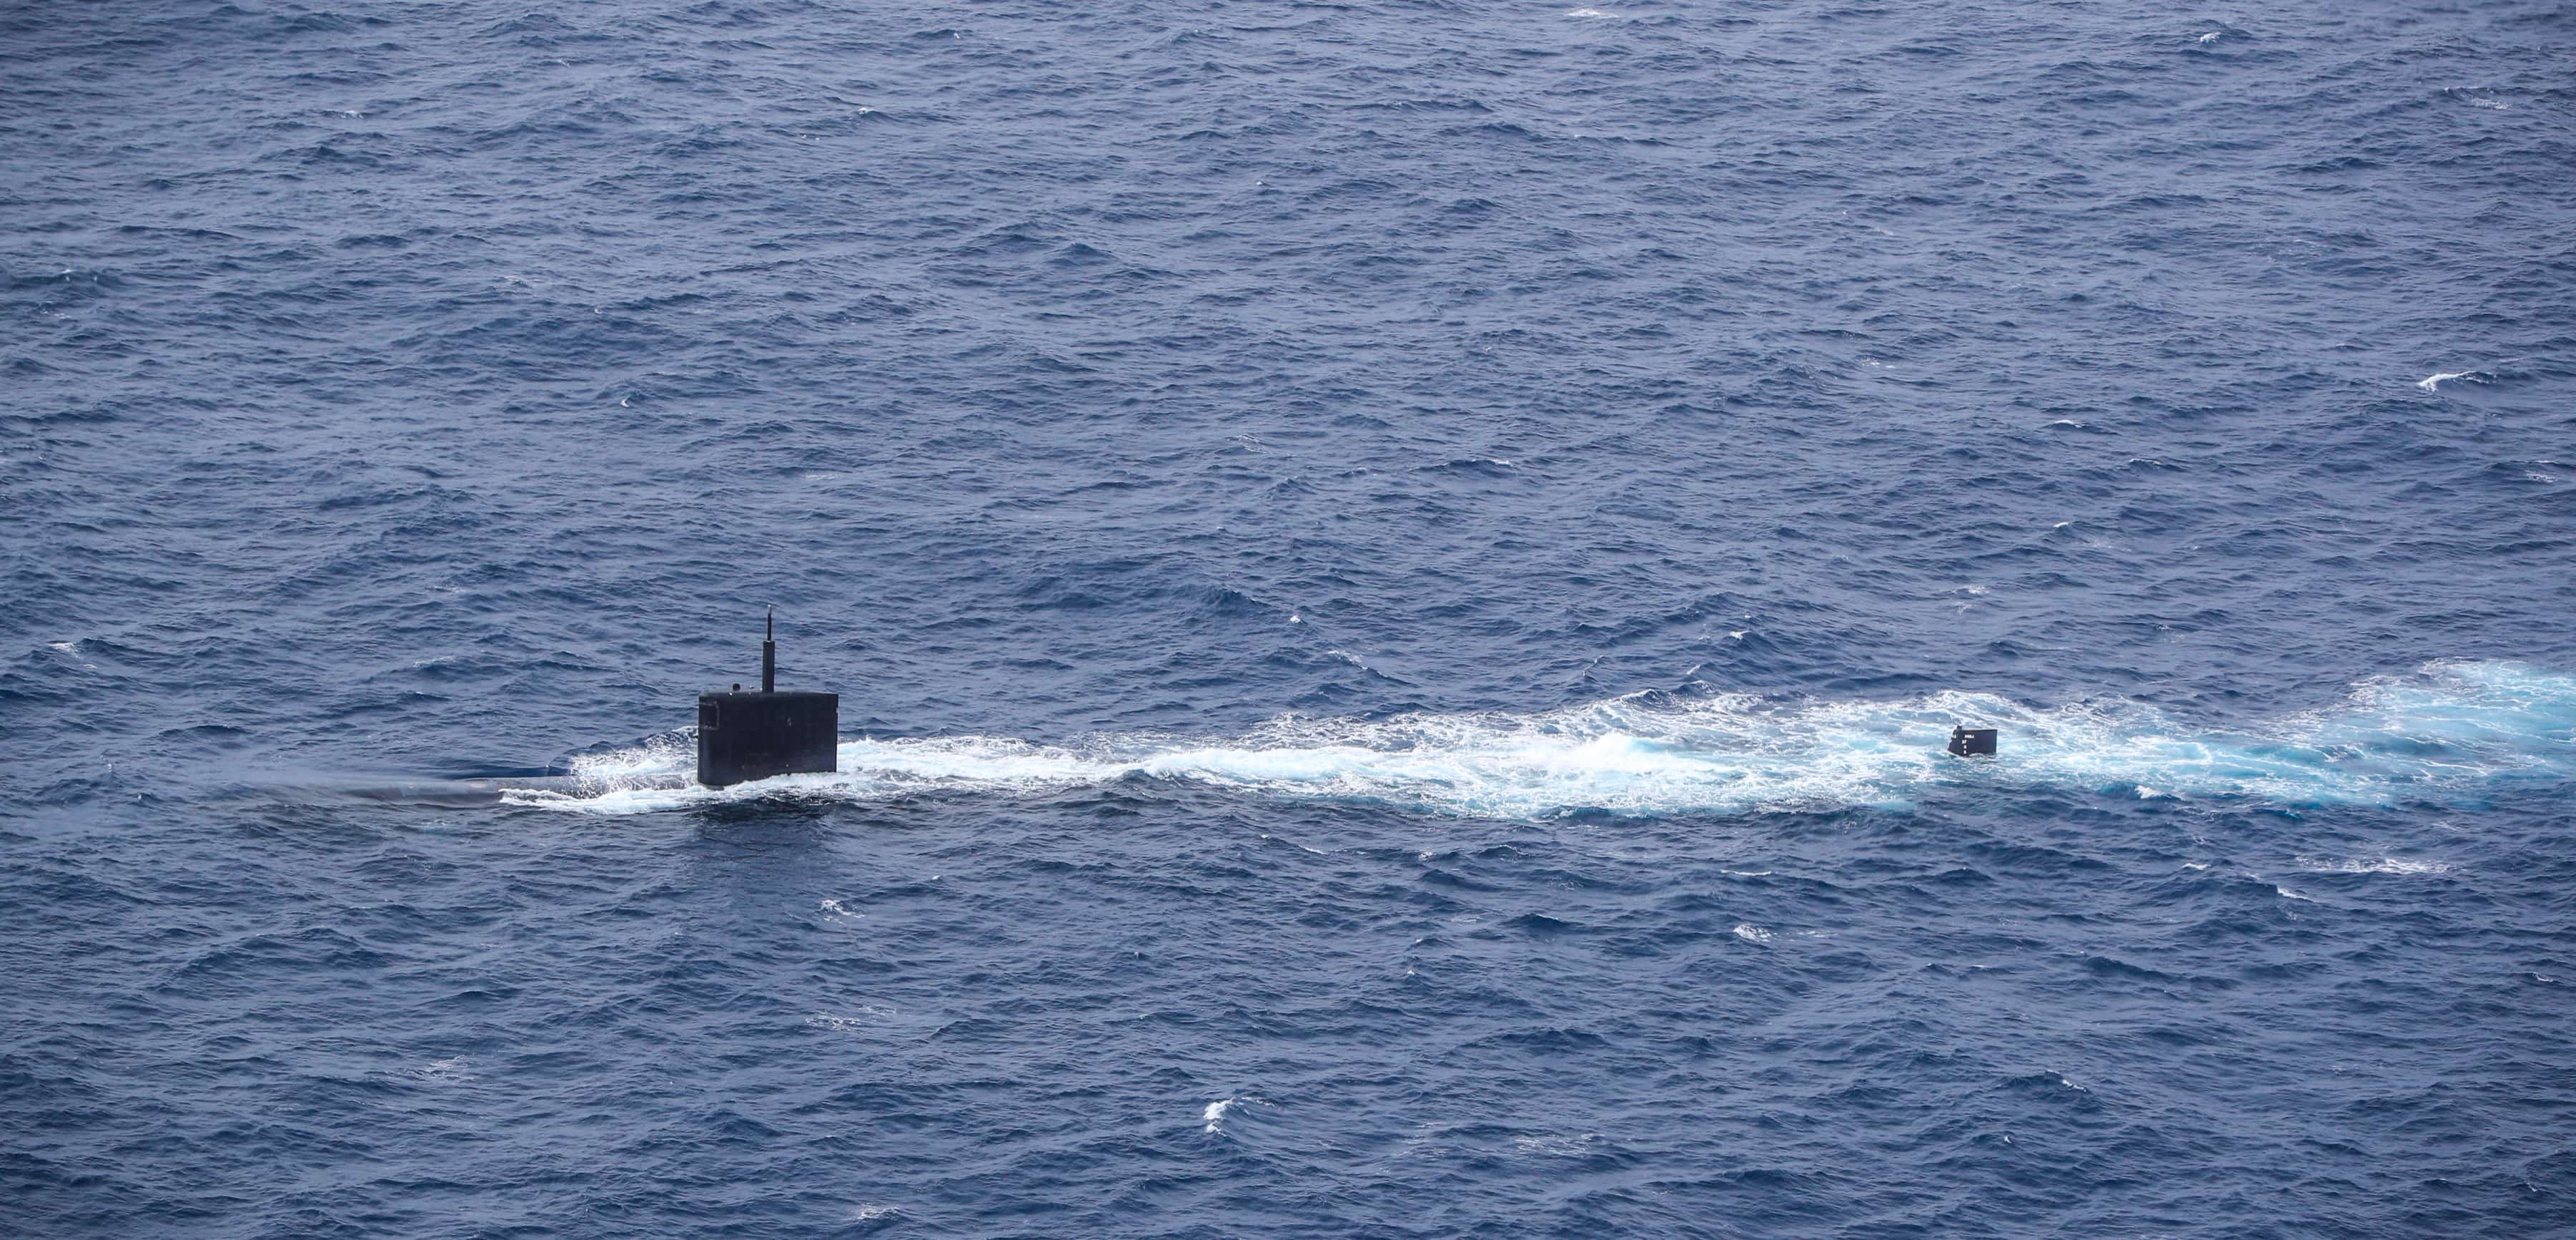 Argentina expresses concern about EE.UU’s submarine presence.